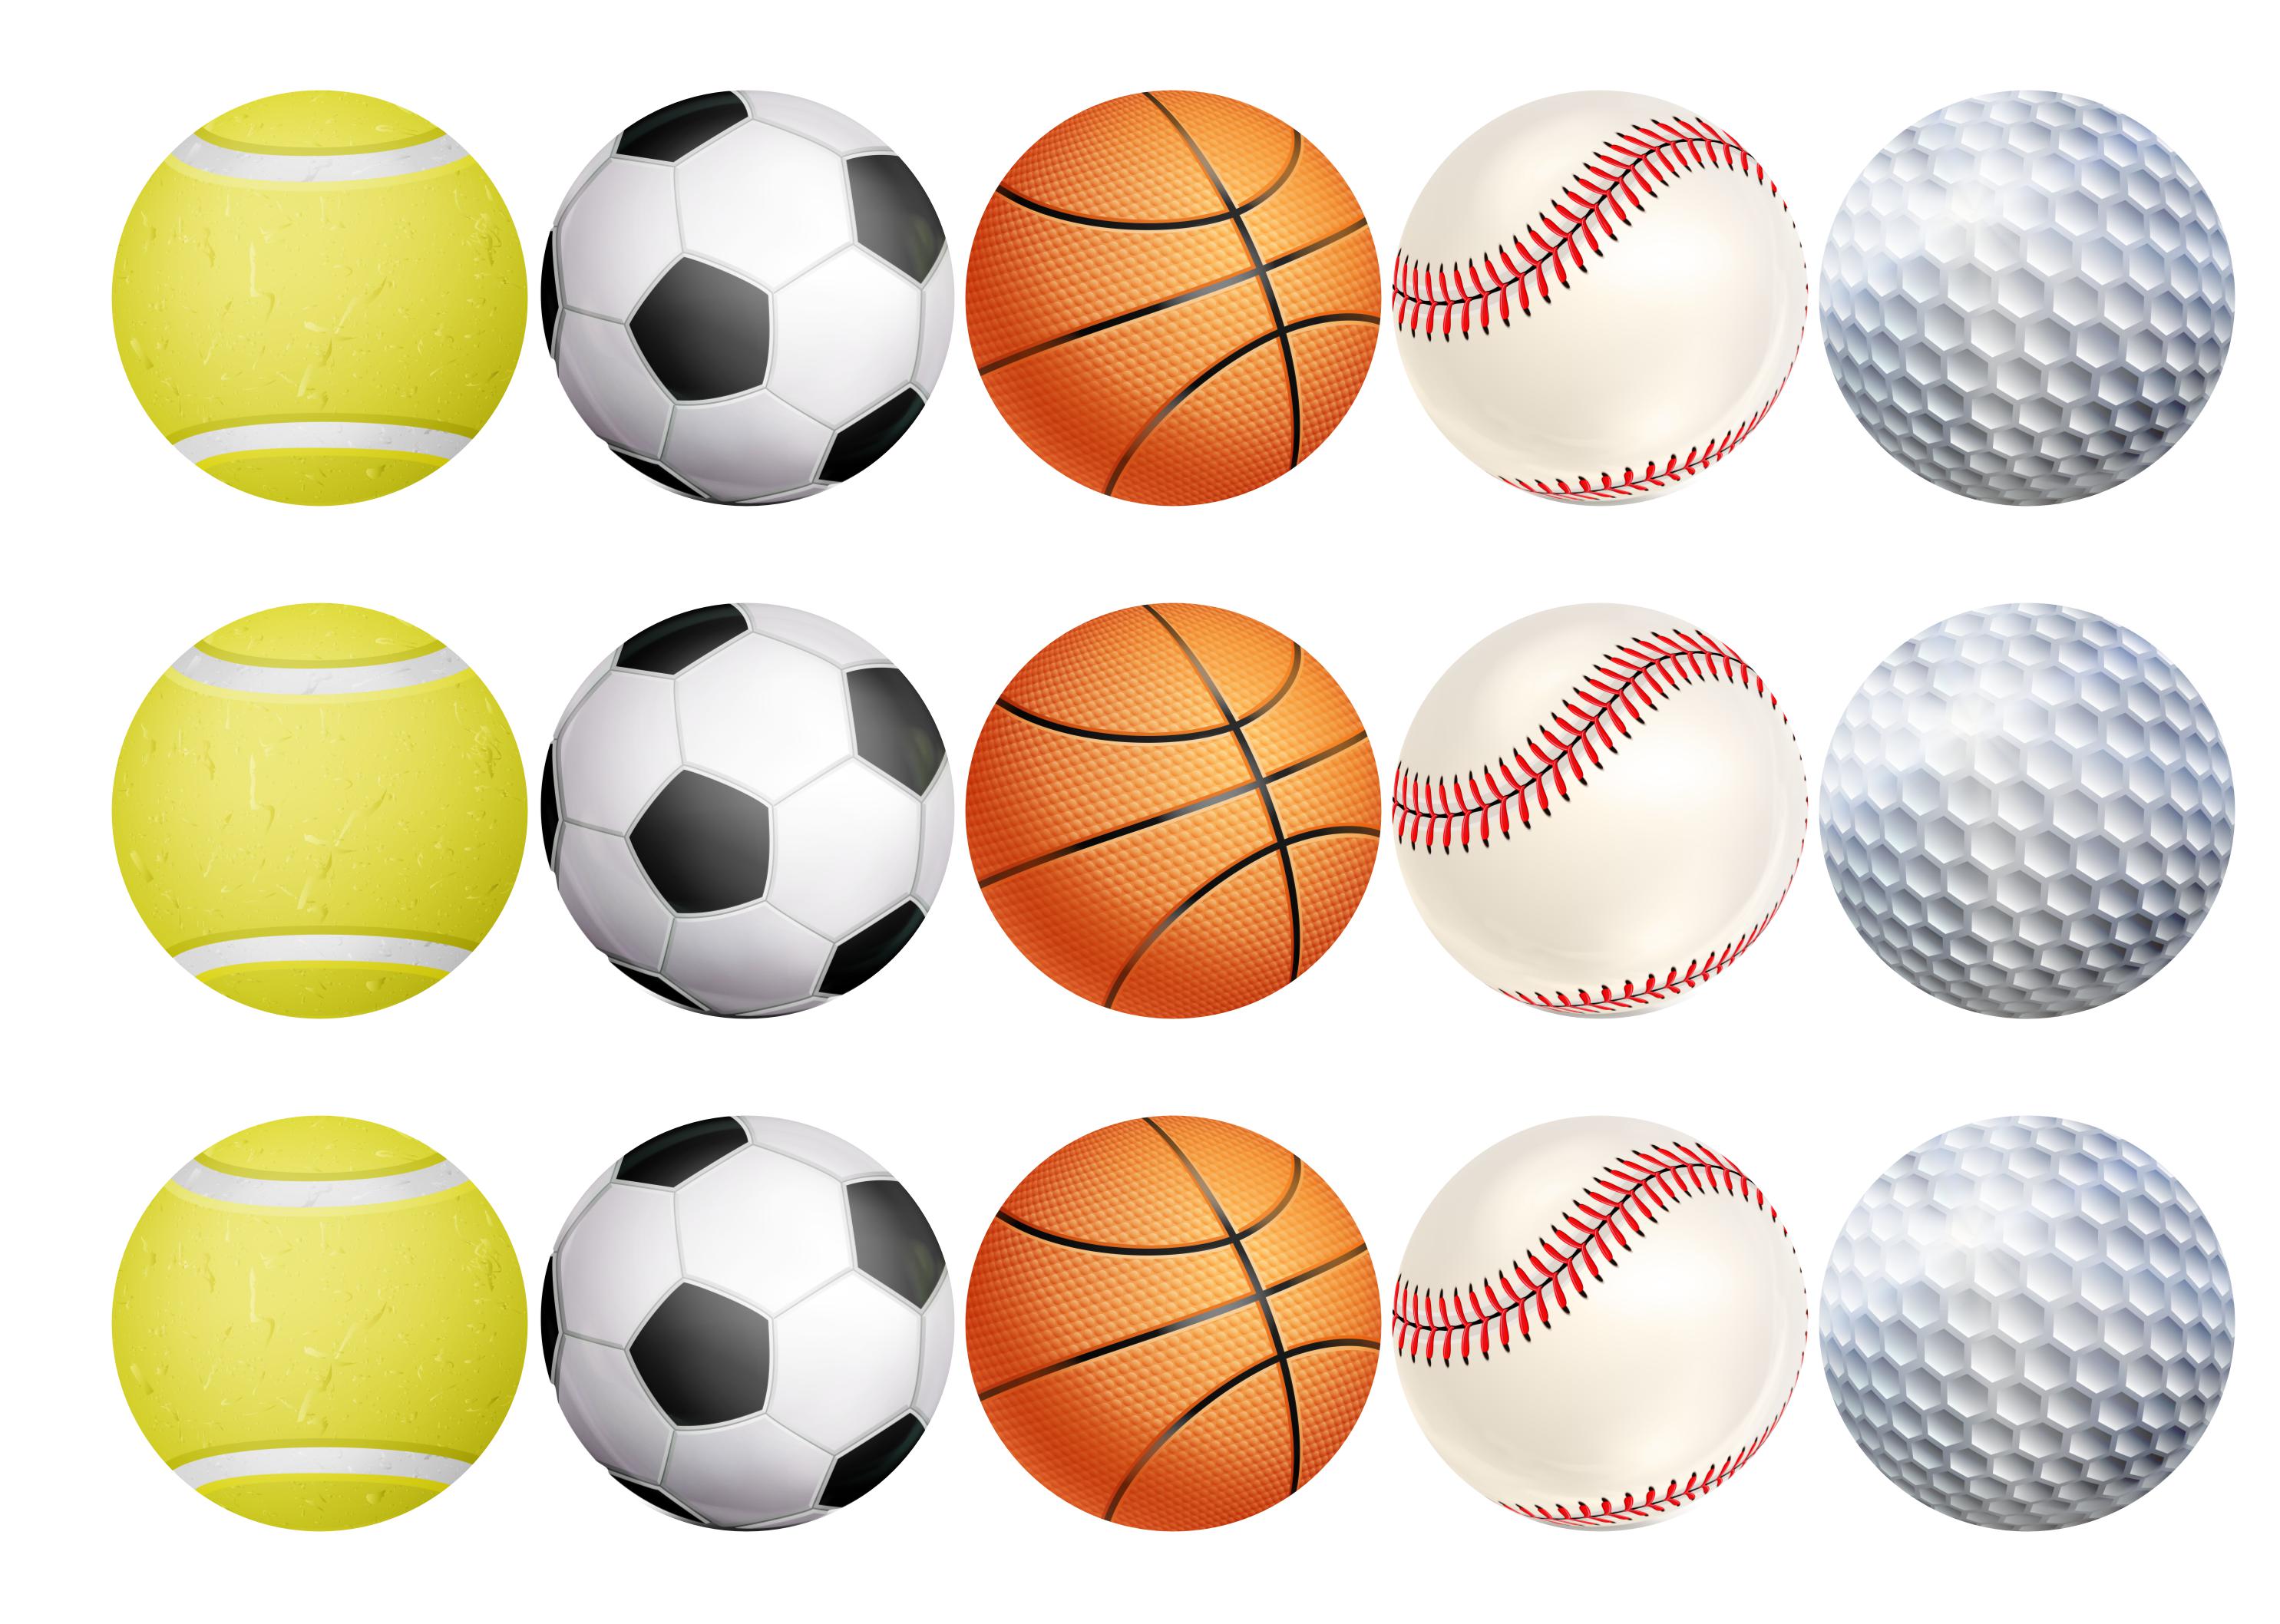 15 cupcake toppers with different sport ball designs